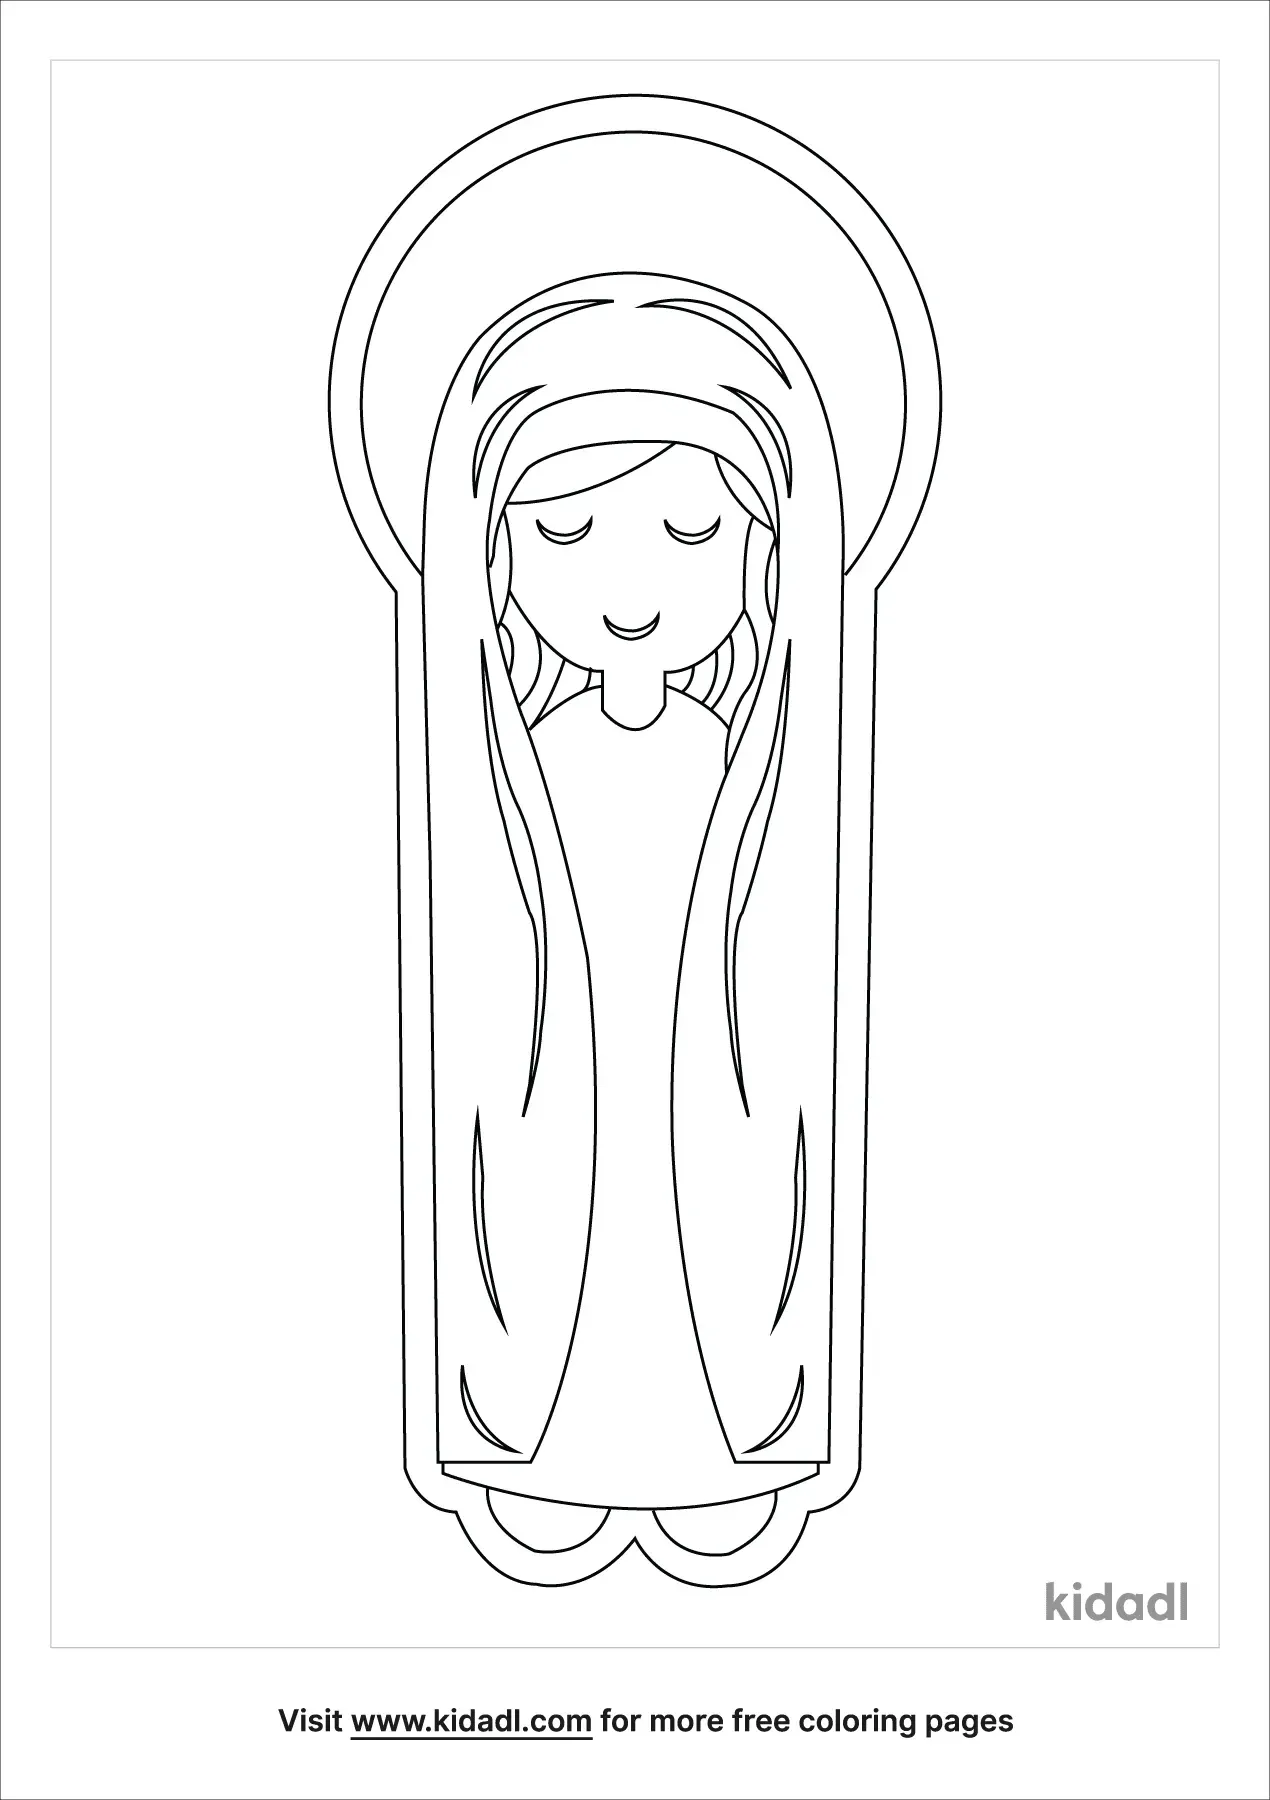 Free Immaculate Conception Coloring Page | Coloring Page Printables ...